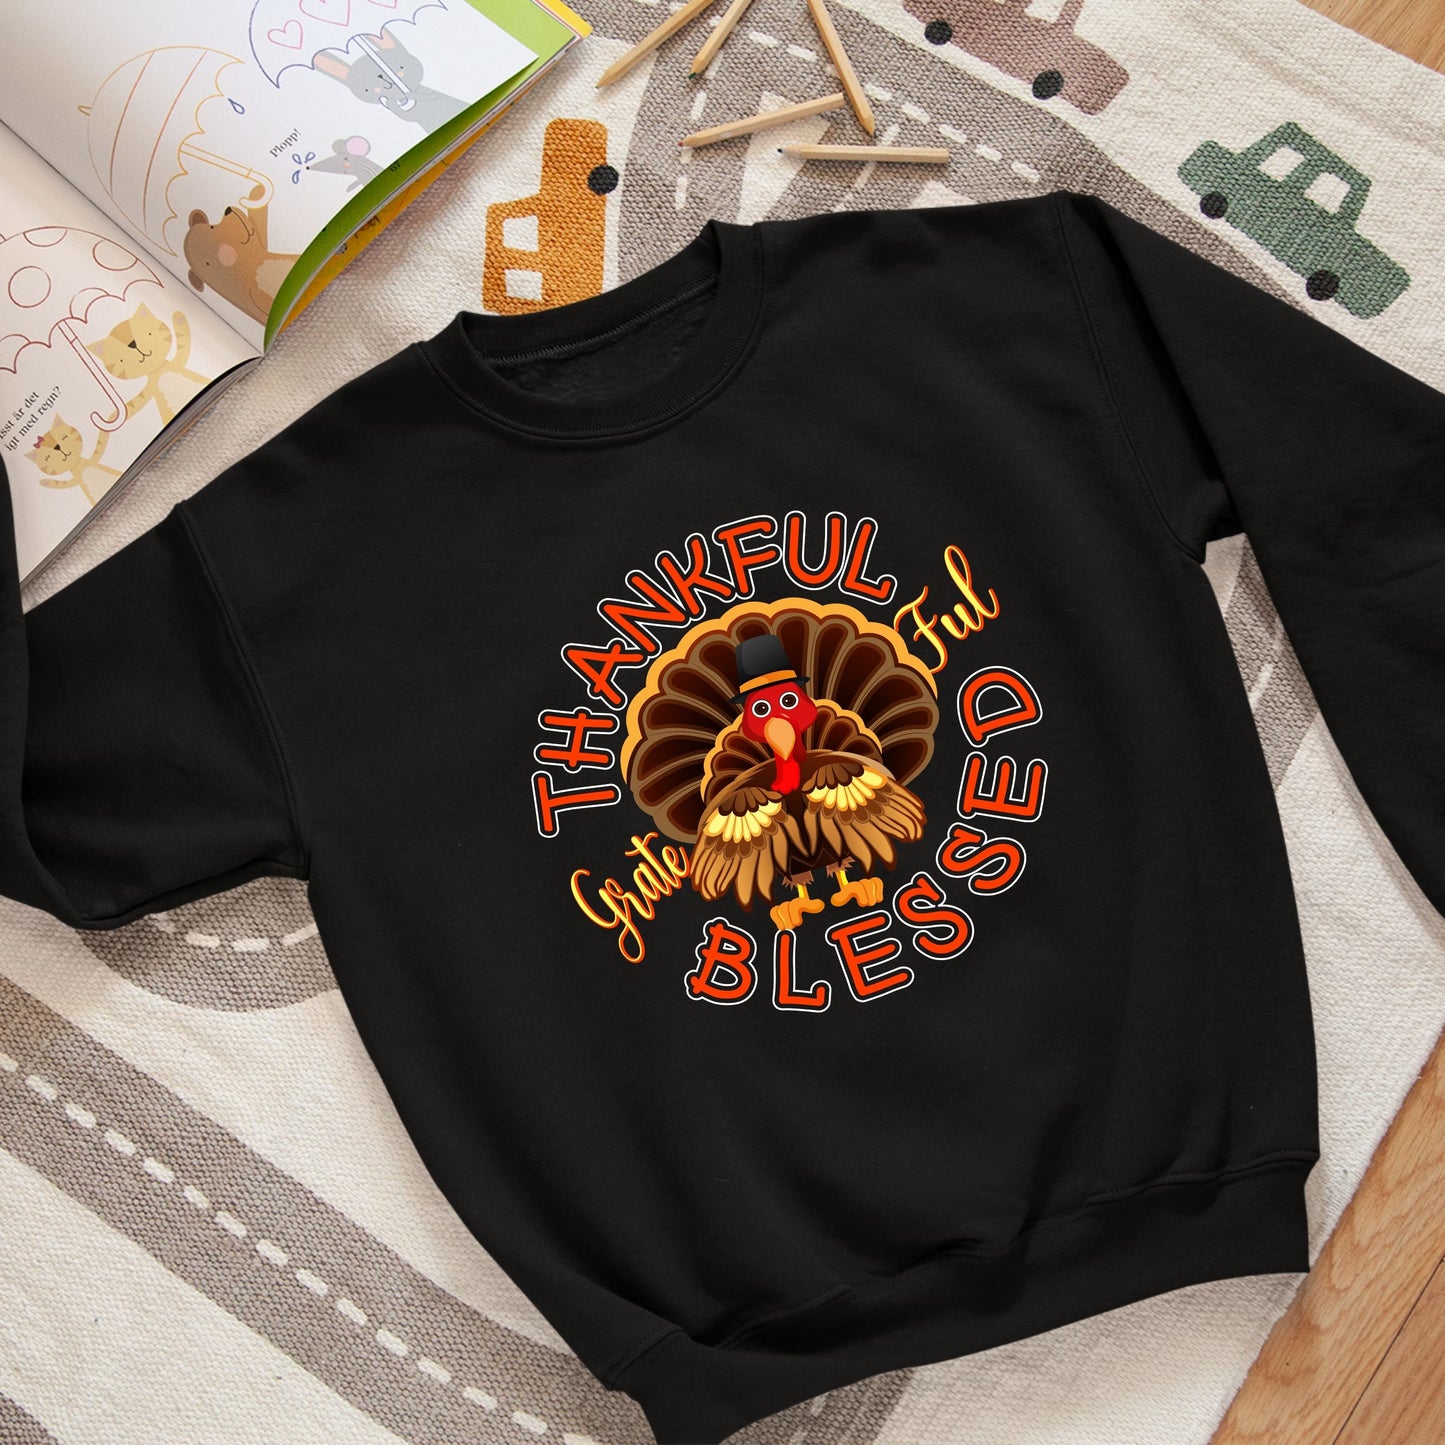 Thankful Grateful Blessed, Thanksgiving Sweatshirt, Thanksgiving Sweater for kids, Thanksgiving Gift Ideas, Cute Thanksgiving